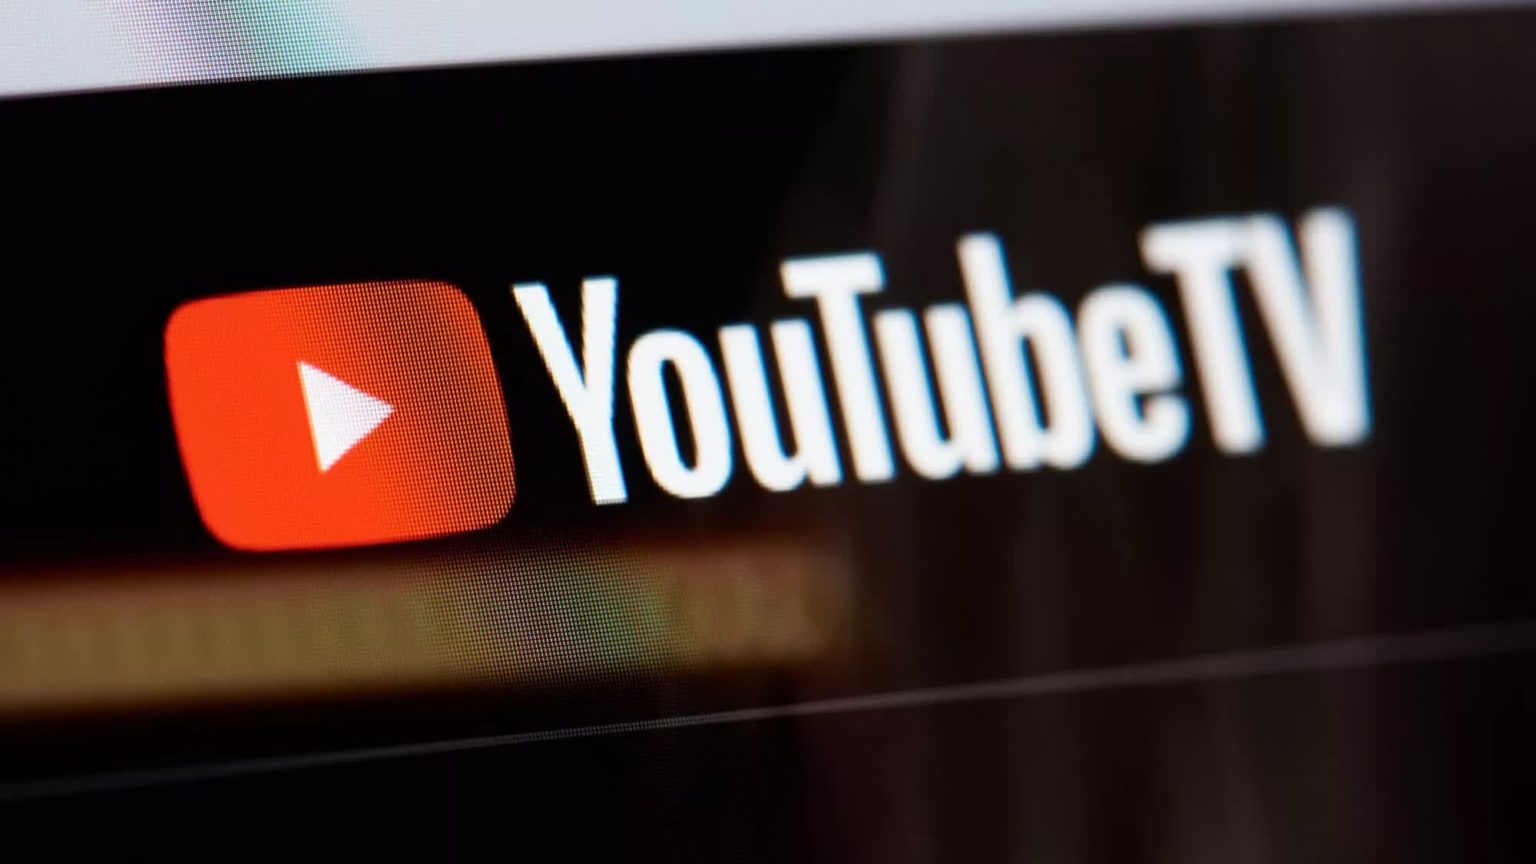 YouTube TV surpasses Dish to become the fourth largest pay-TV provider in the US